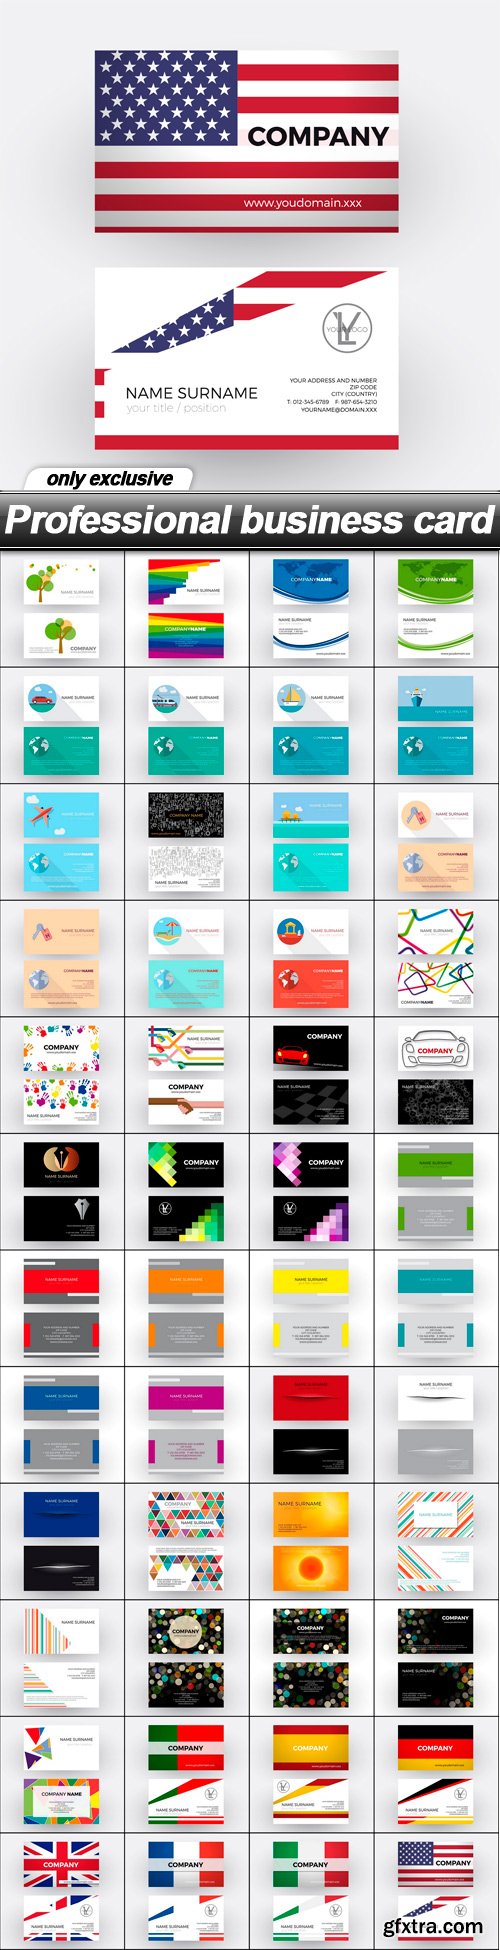 Professional business card - 48 EPS